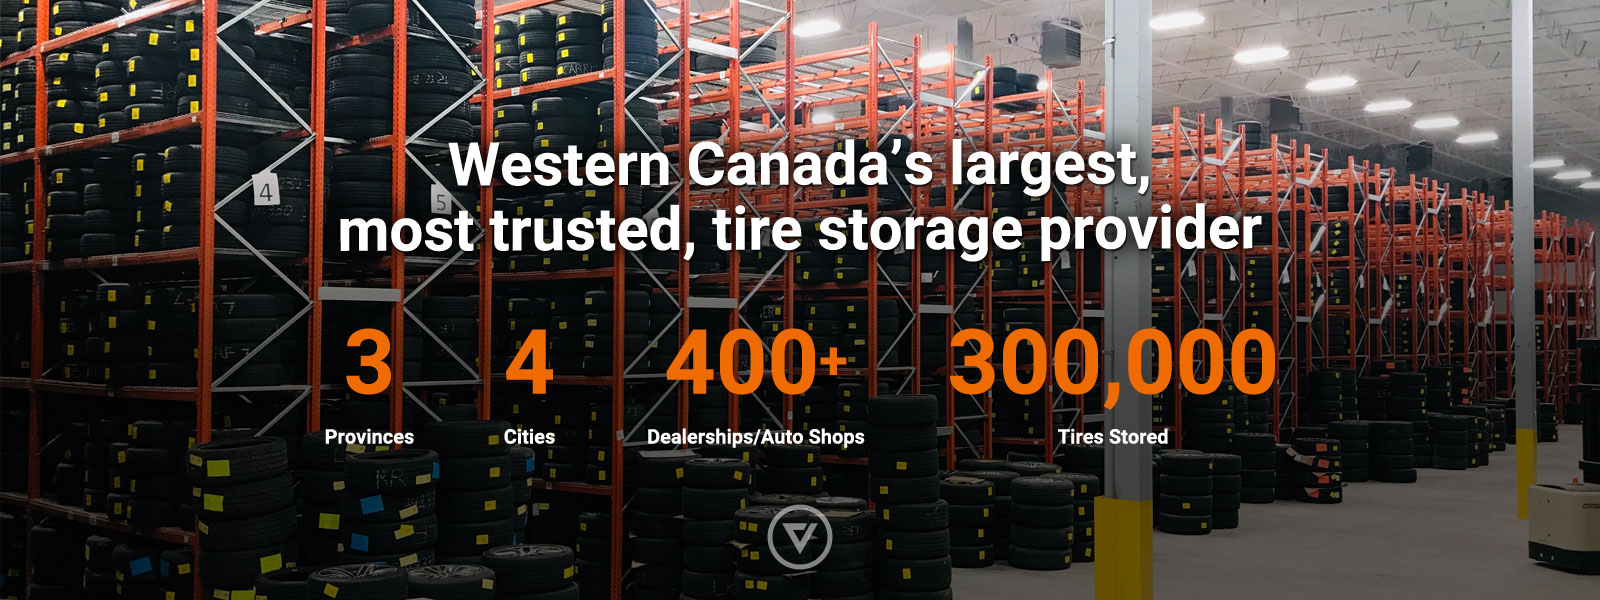 Western Canada's largest, most trusted, tire storage provider